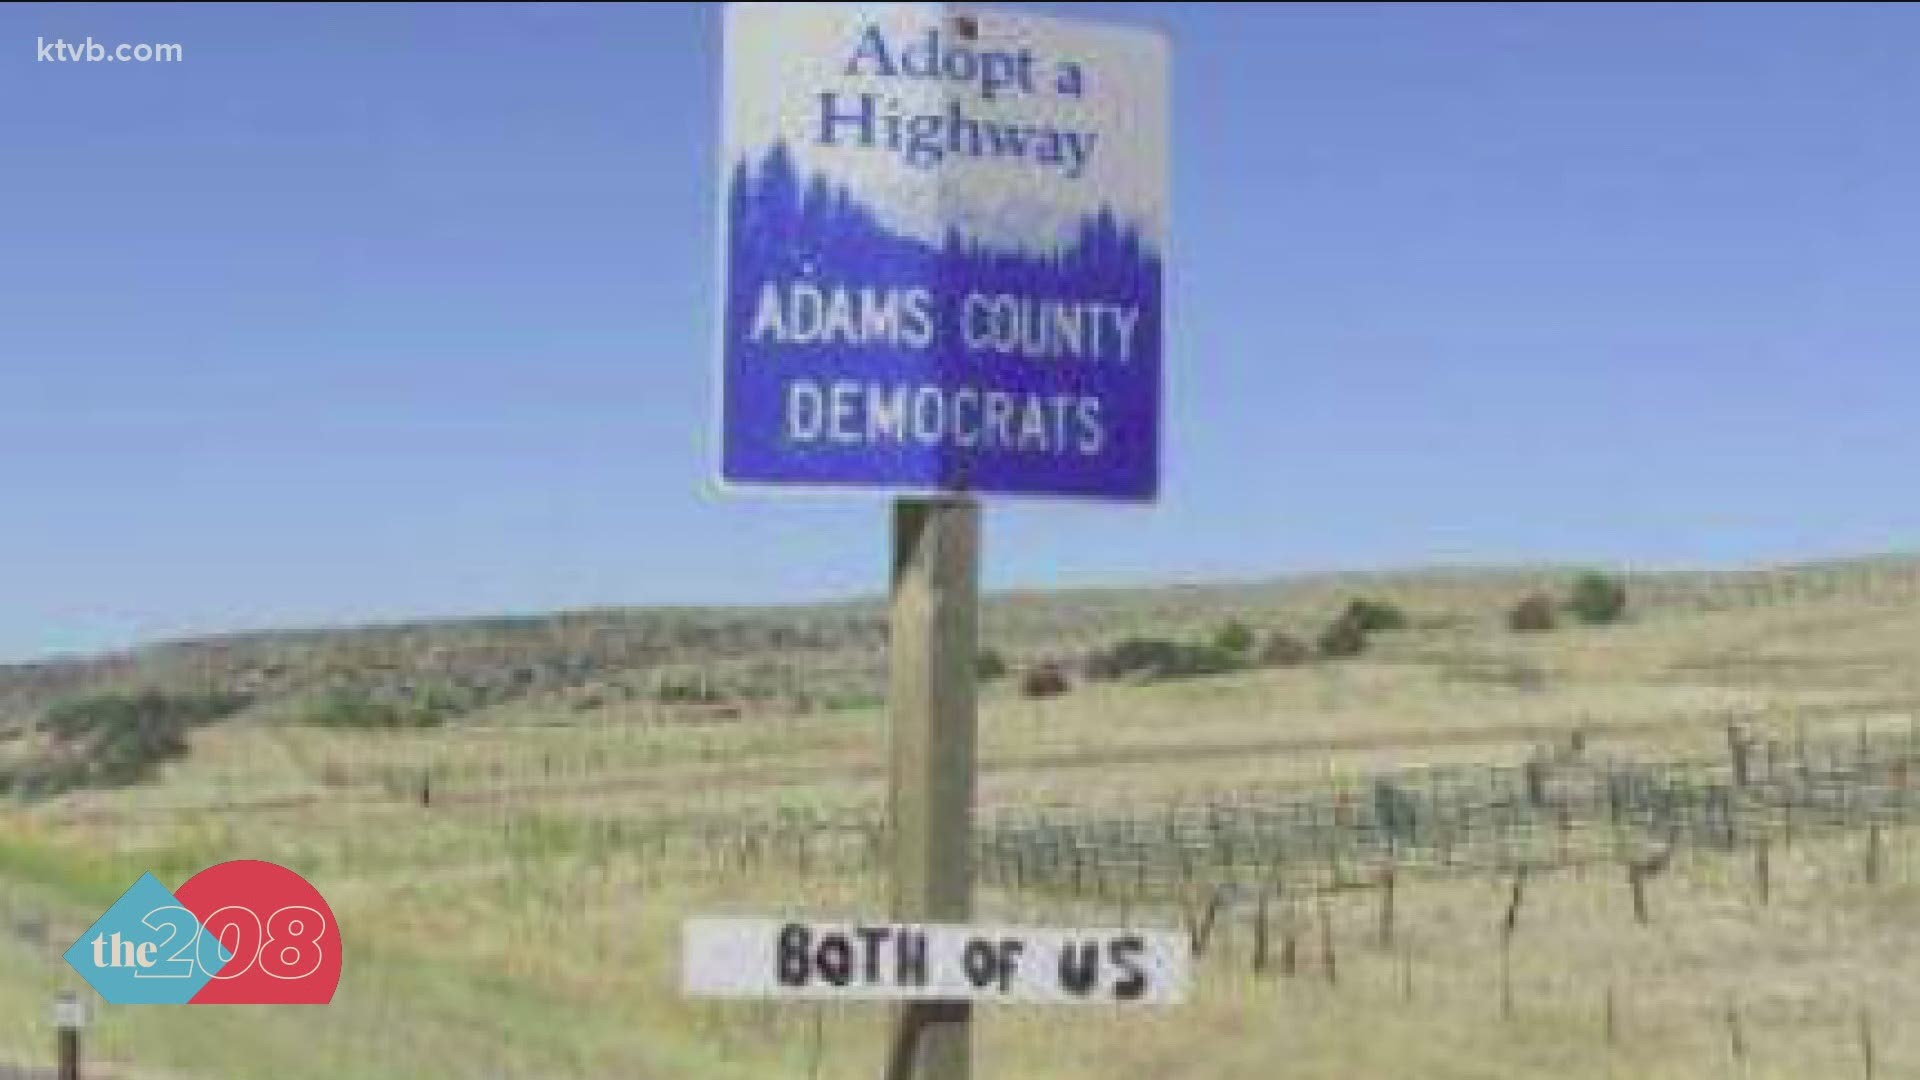 Janie Cole, a viewer of The 208, sent in a photo taken by her brother Monte of an Adopt A Highway sign on Highway 95